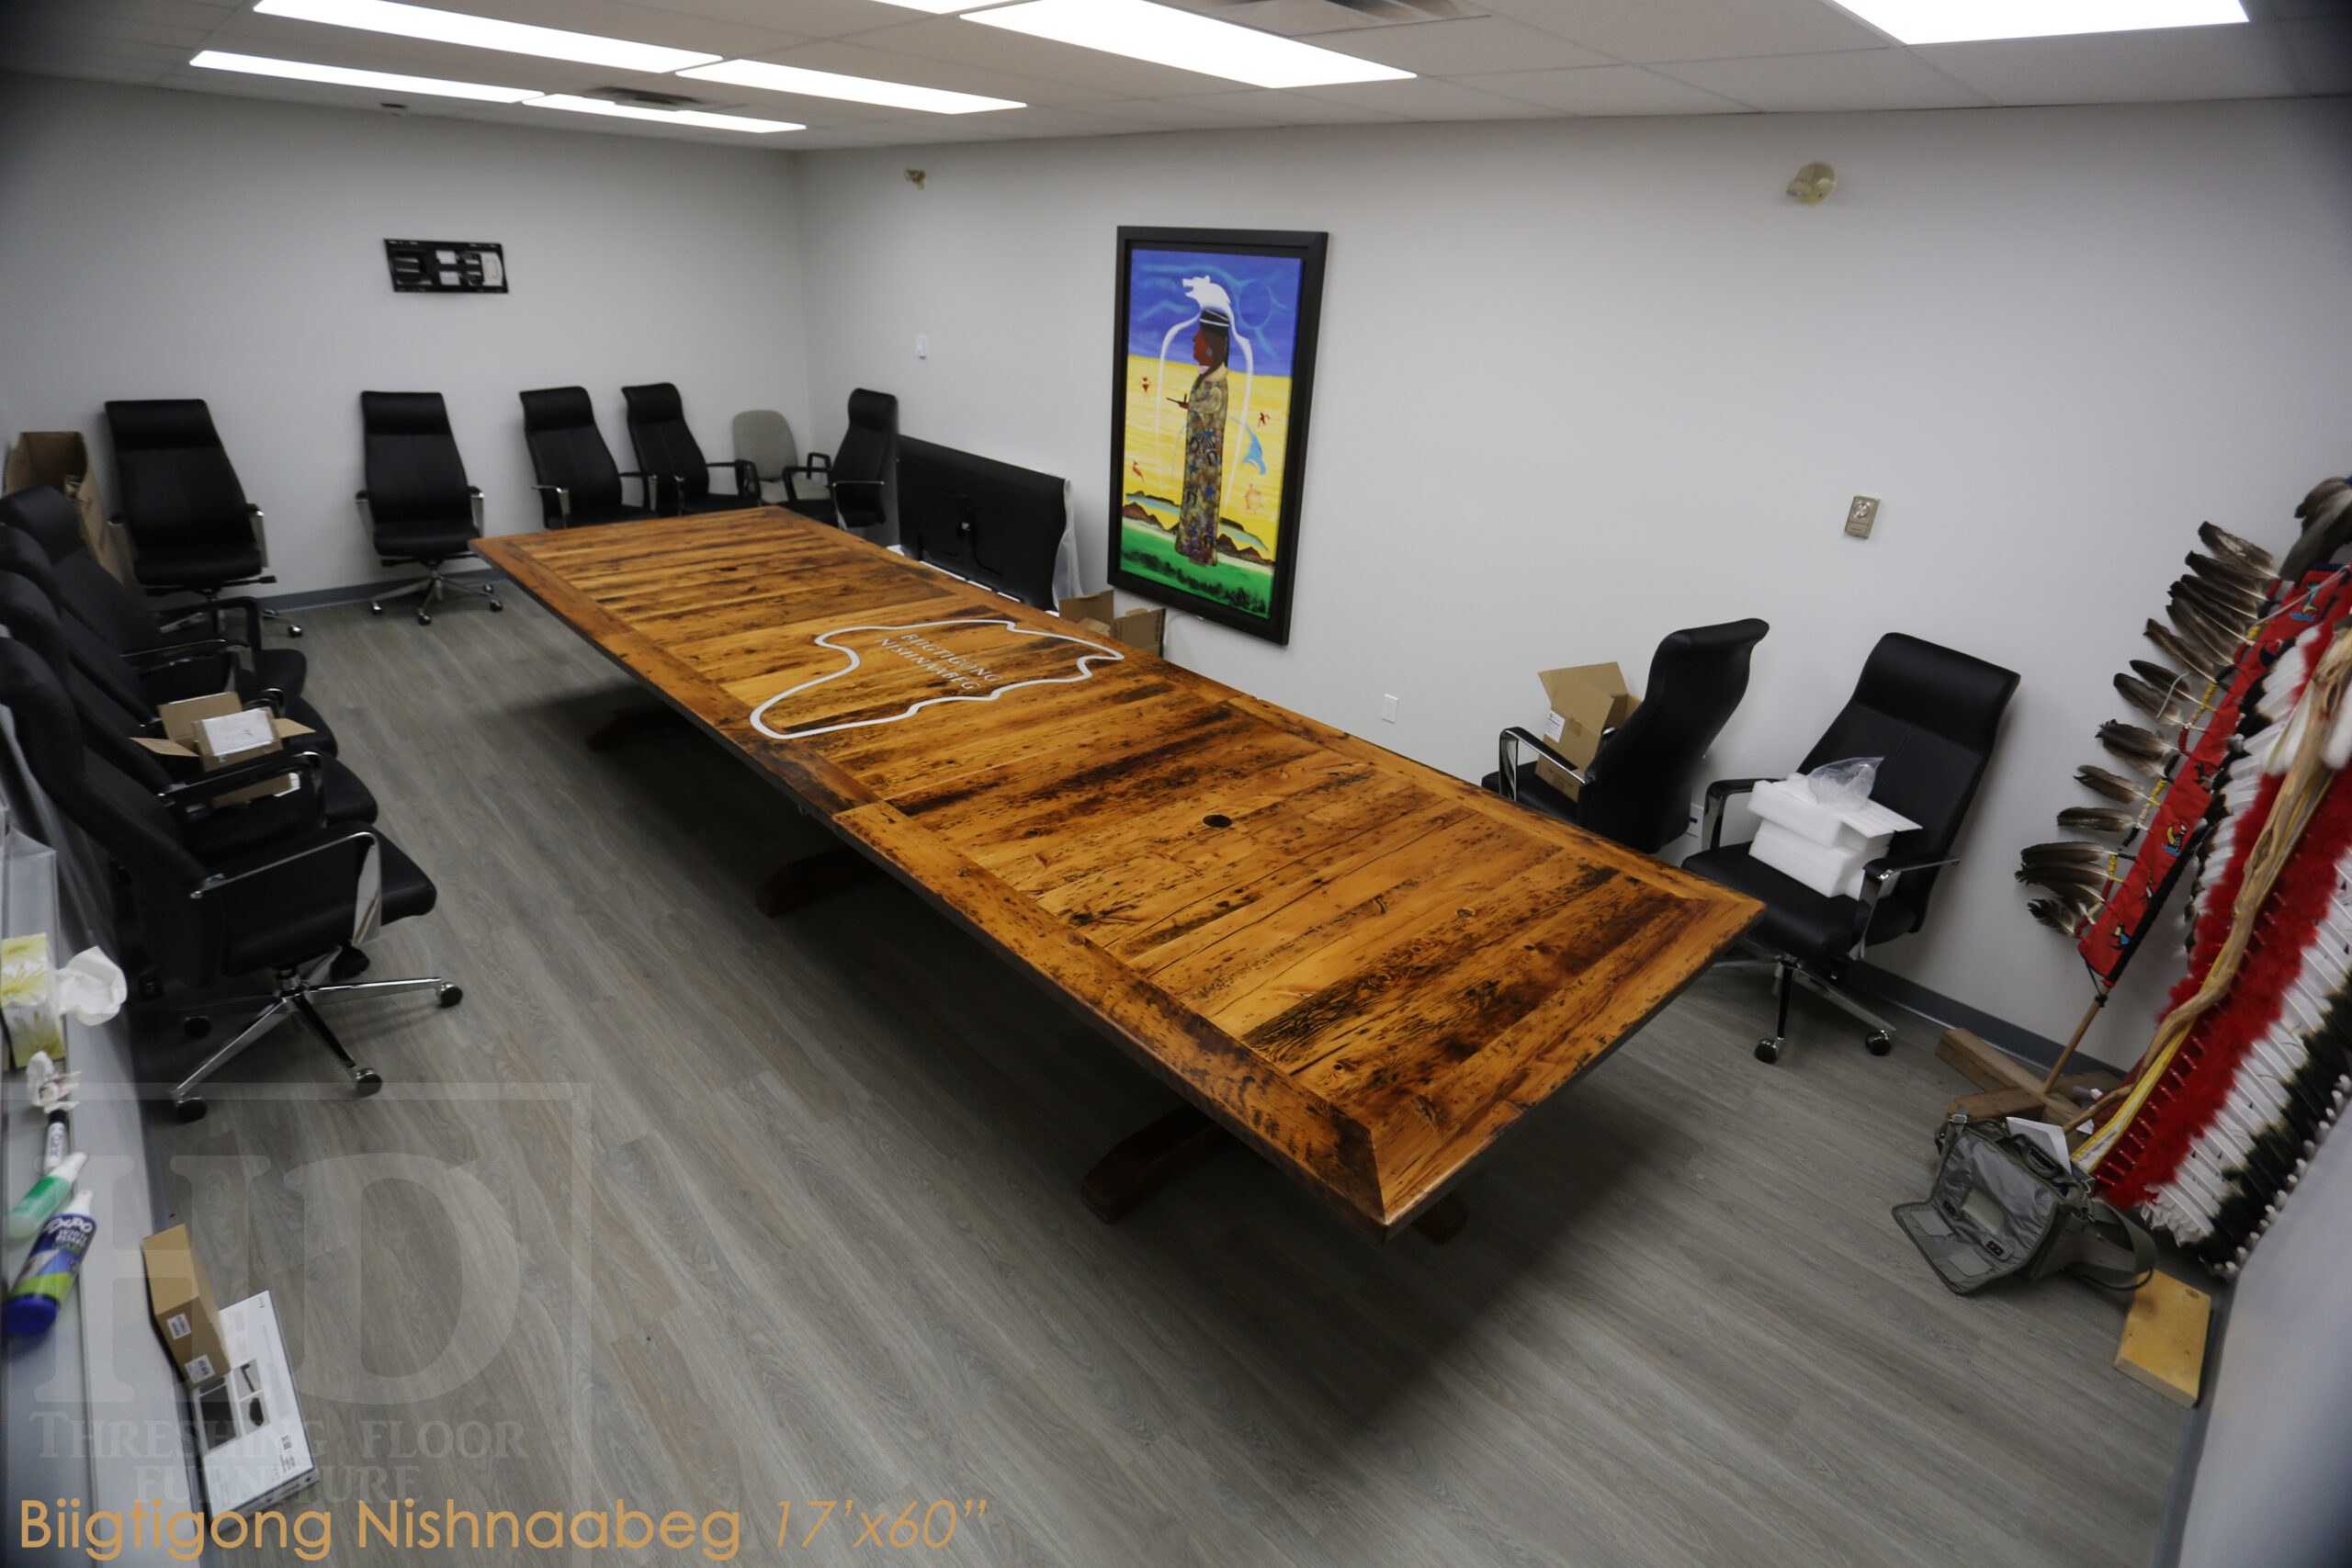 Project details: 17â€™ Reclaimed Ontario Barnwood Table we made for a Marathon, Ontario community centre â€“ Hand-Hewn Beam Pedestals Base - Old Growth Hemlock Threshing Floor Construction â€“ Original edges & distressing maintained â€“ Bread Edge Ends â€“ Custom Steel Graphic Embedded - Premium epoxy + satin polyurethane finish â€“ Top Built in 3 parts / Onsite Final Assembly - www.table.ca